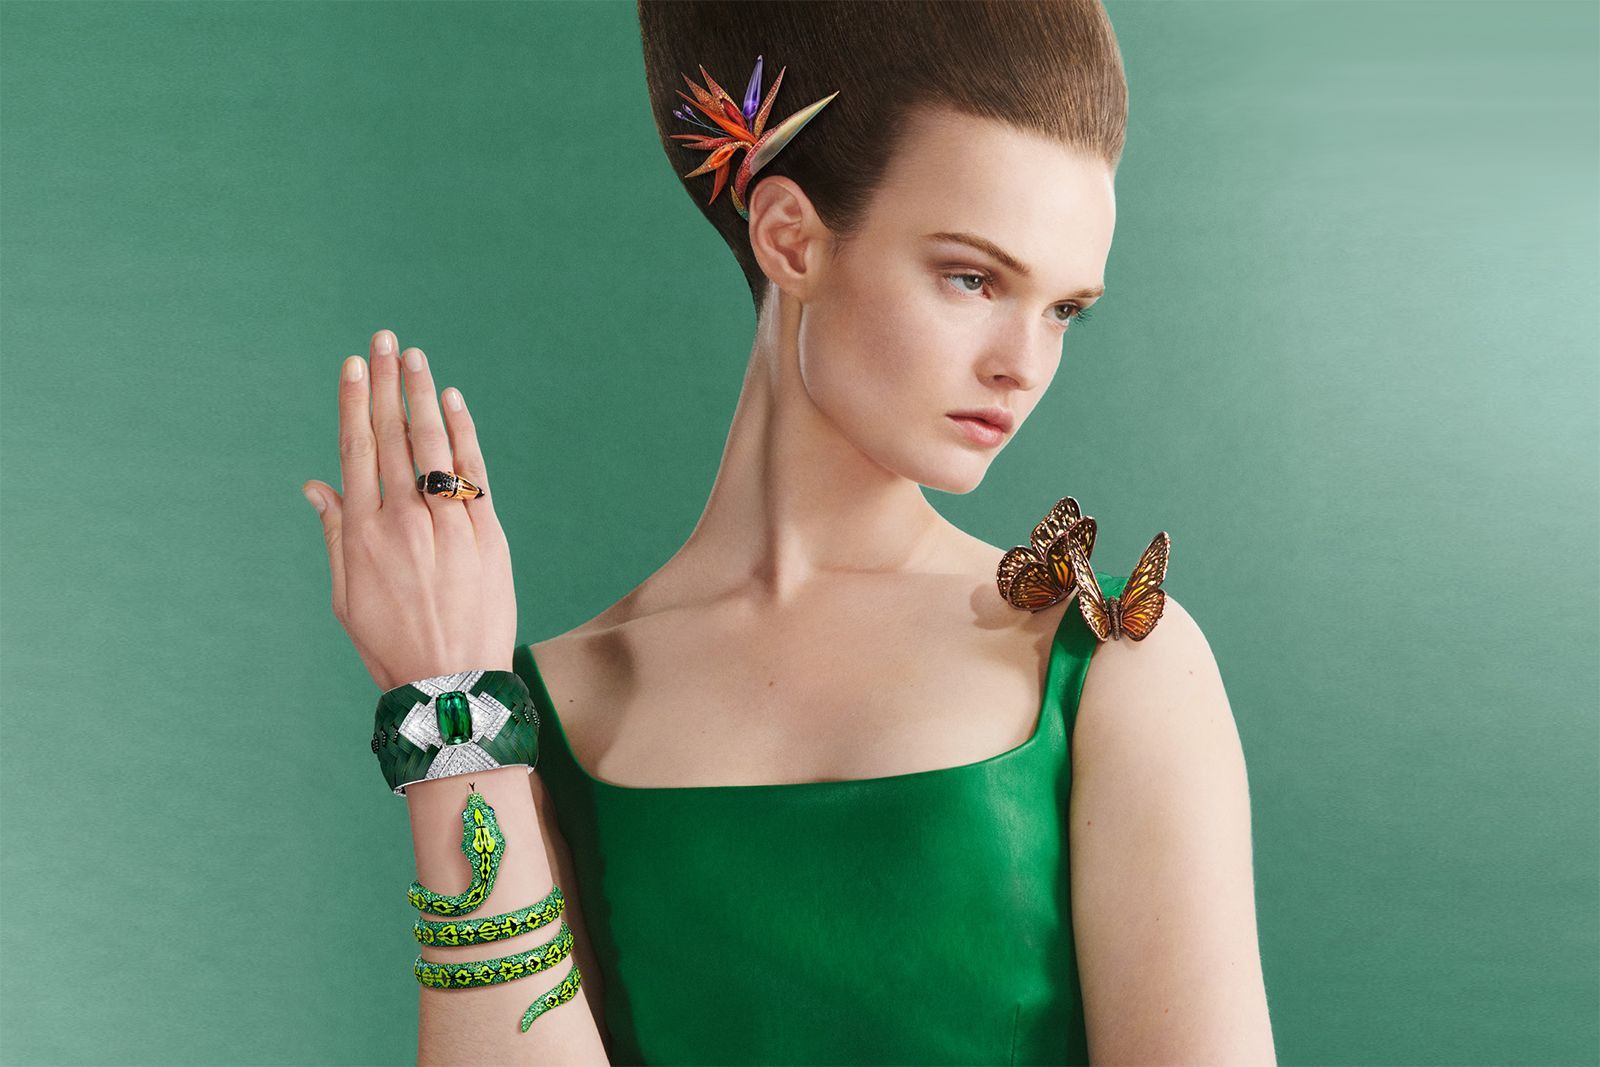 Boucheron tourmaline, diamond, aluminium, white gold, amethyst, sapphire, lacquer, titanium, citrine, rubellite, spinel, tsavorite, onyx and natural butterfly wings Fleur de Paradis head jewel, Papillon brooch, Toucan ring, Feuillage Diamant cuff, Serpent bracelet and Toucan bracelet from the Carte Blanche Ailleurs High Jewellery collection